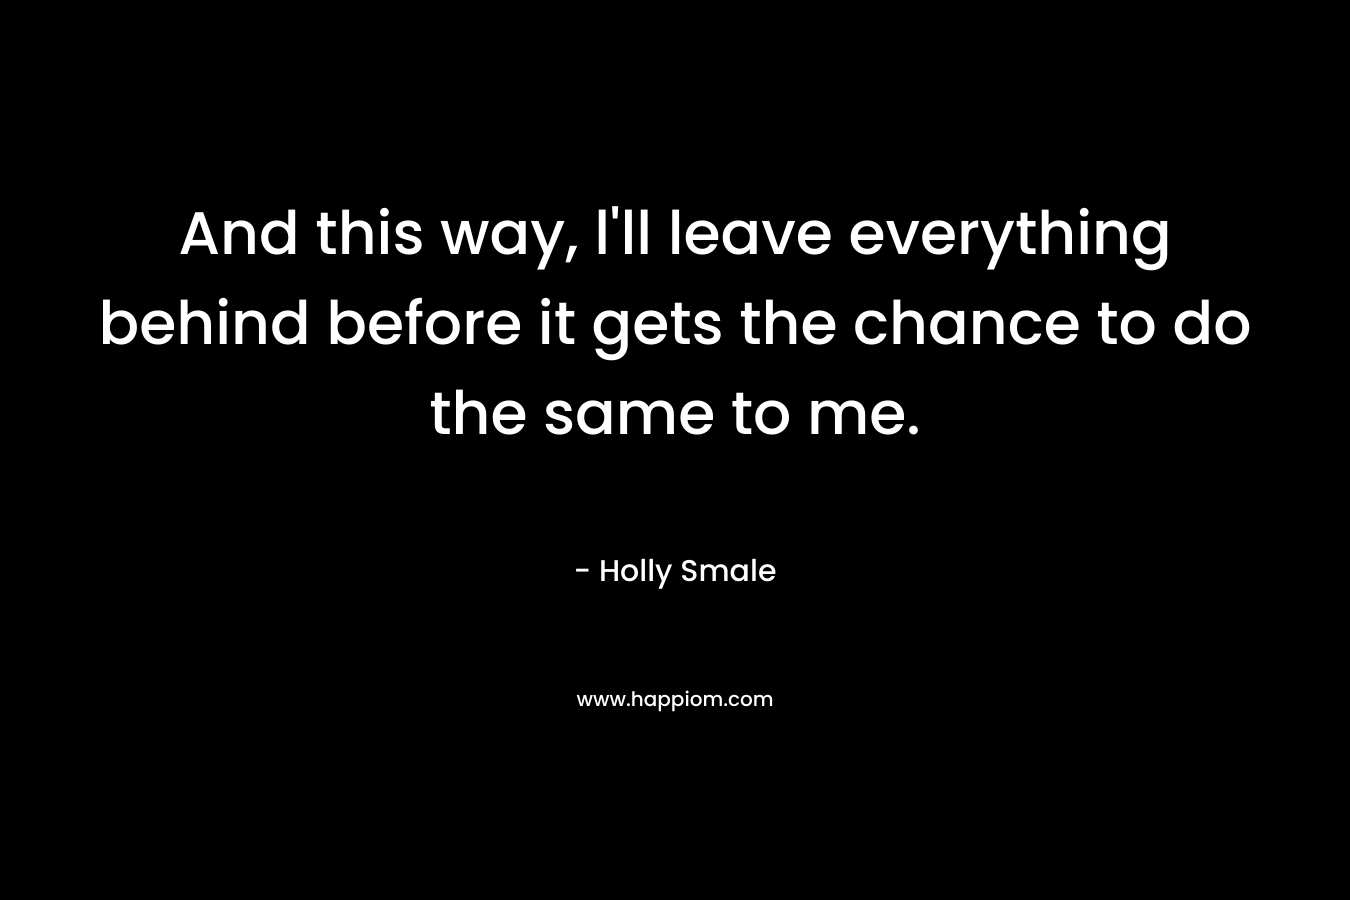 And this way, l’ll leave everything behind before it gets the chance to do the same to me. – Holly Smale